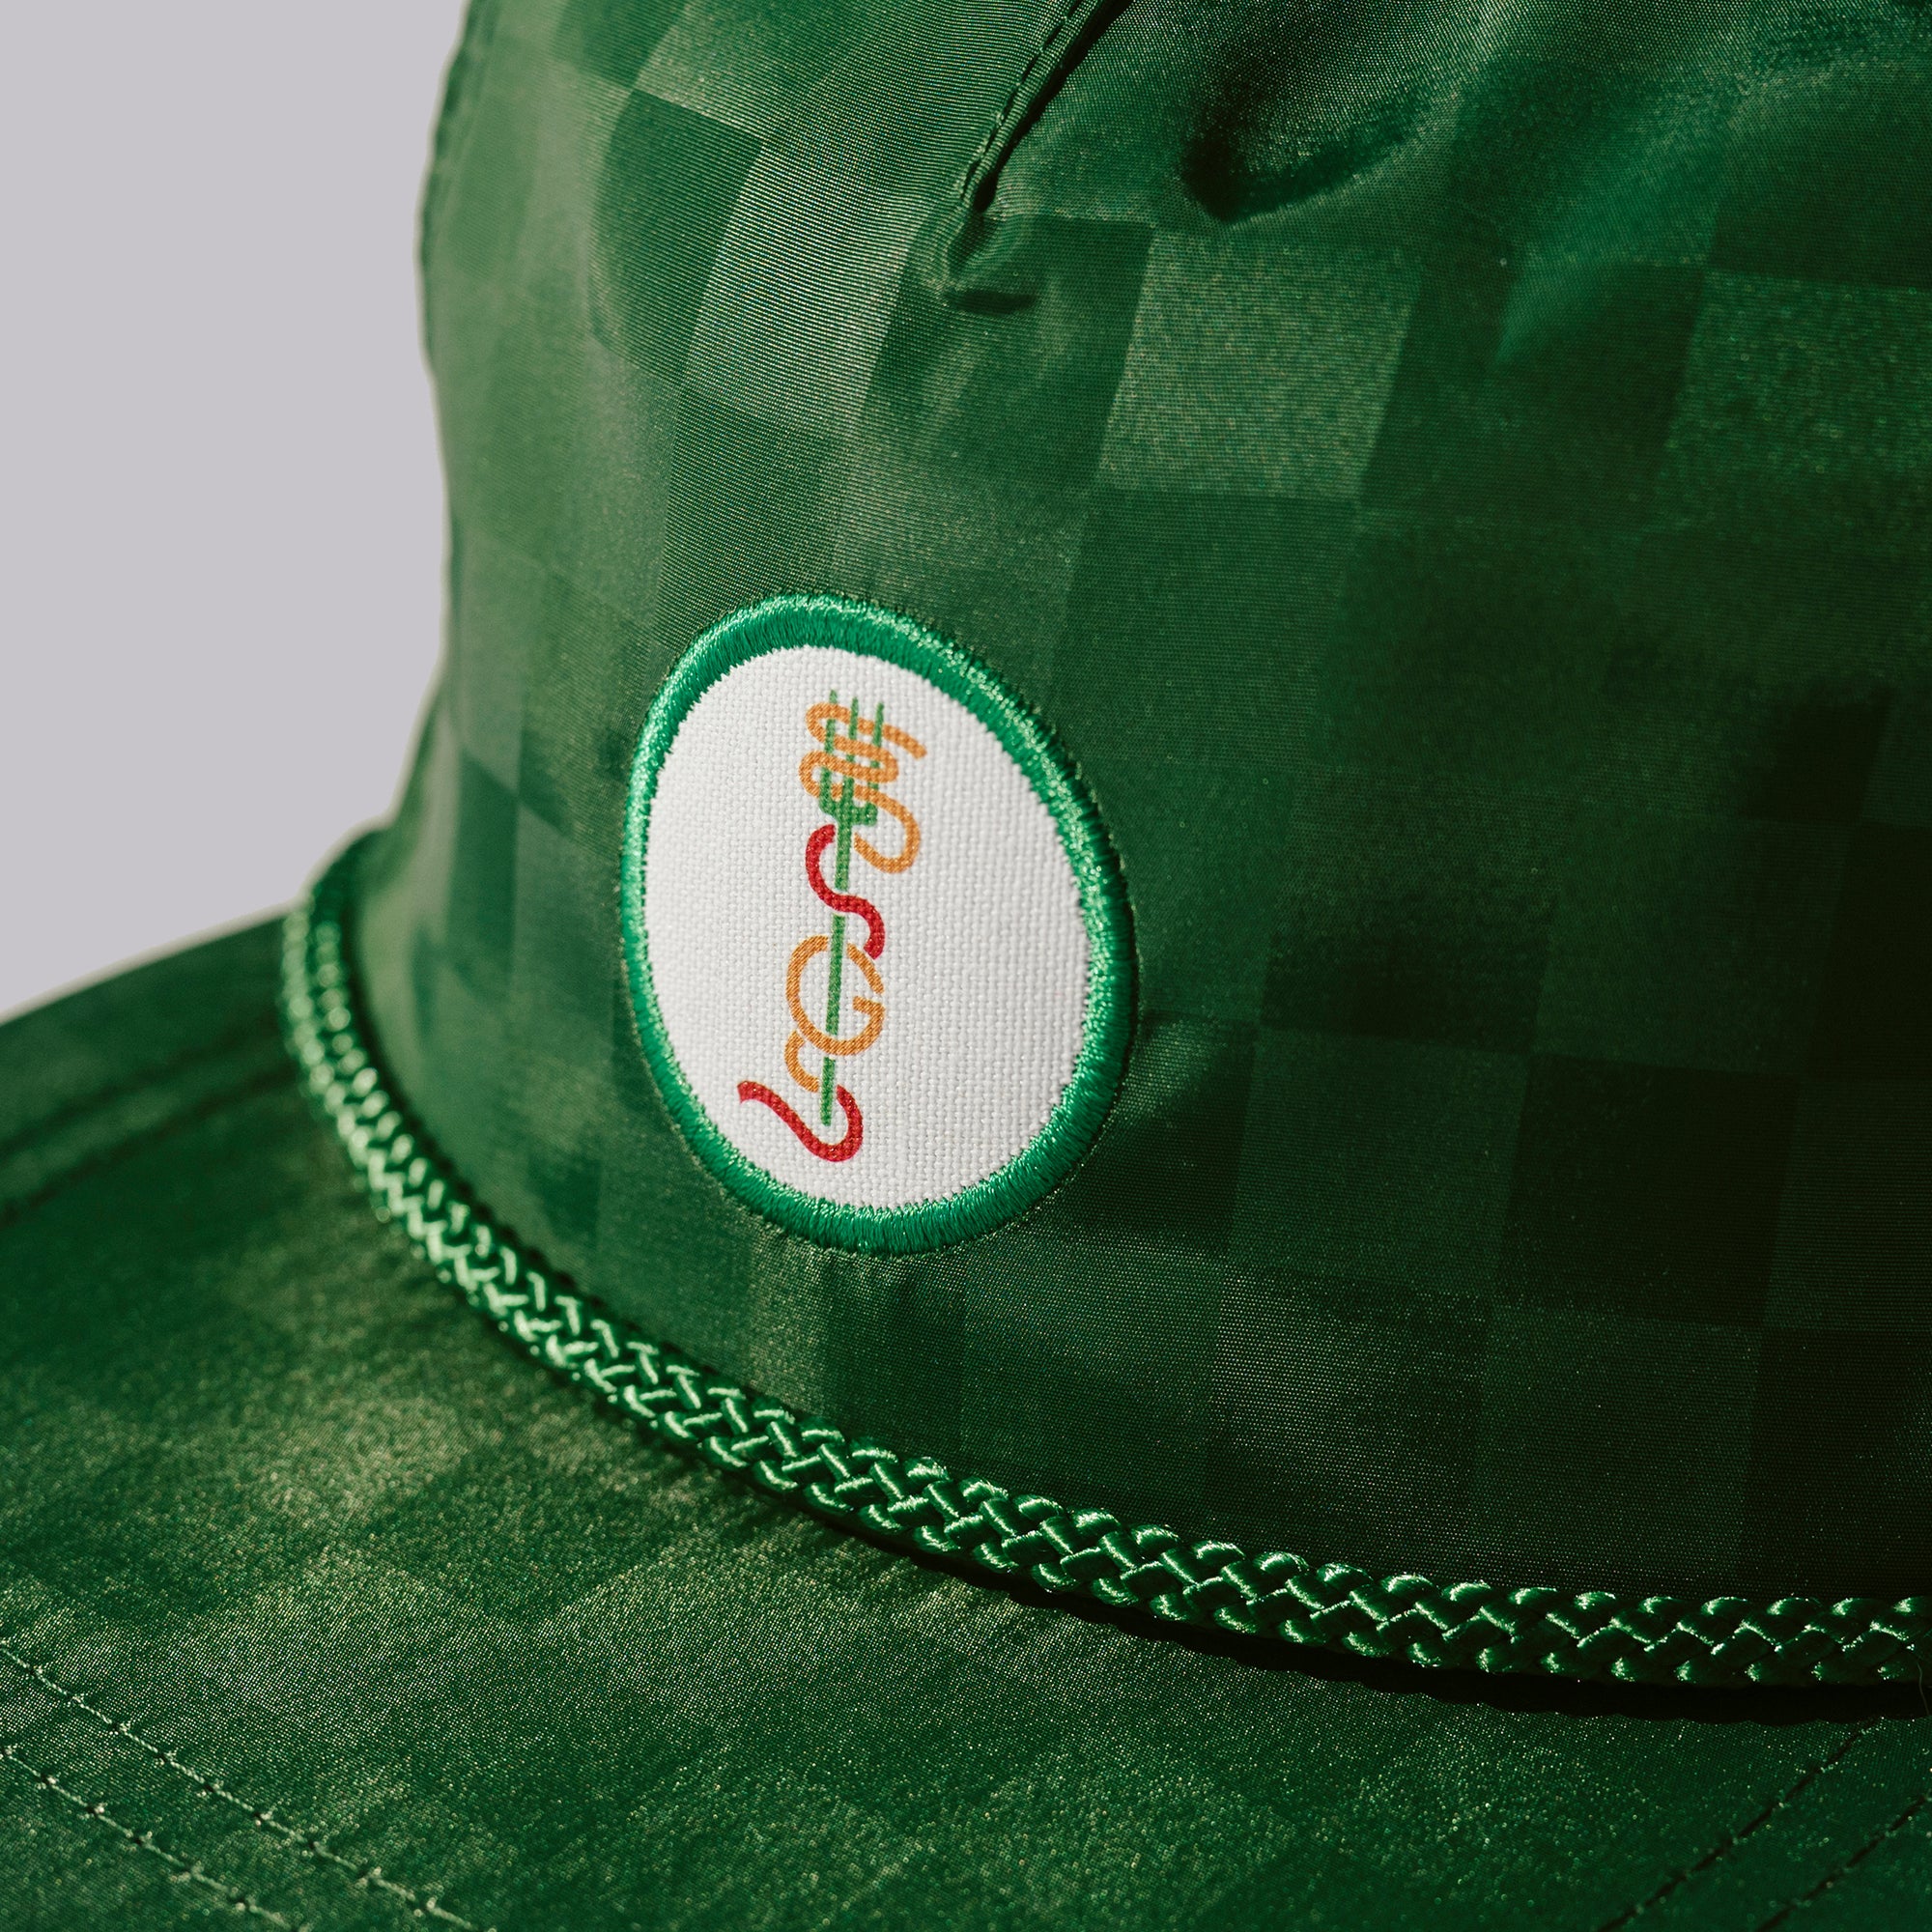 The Imperial Script Performance Bucket Hat